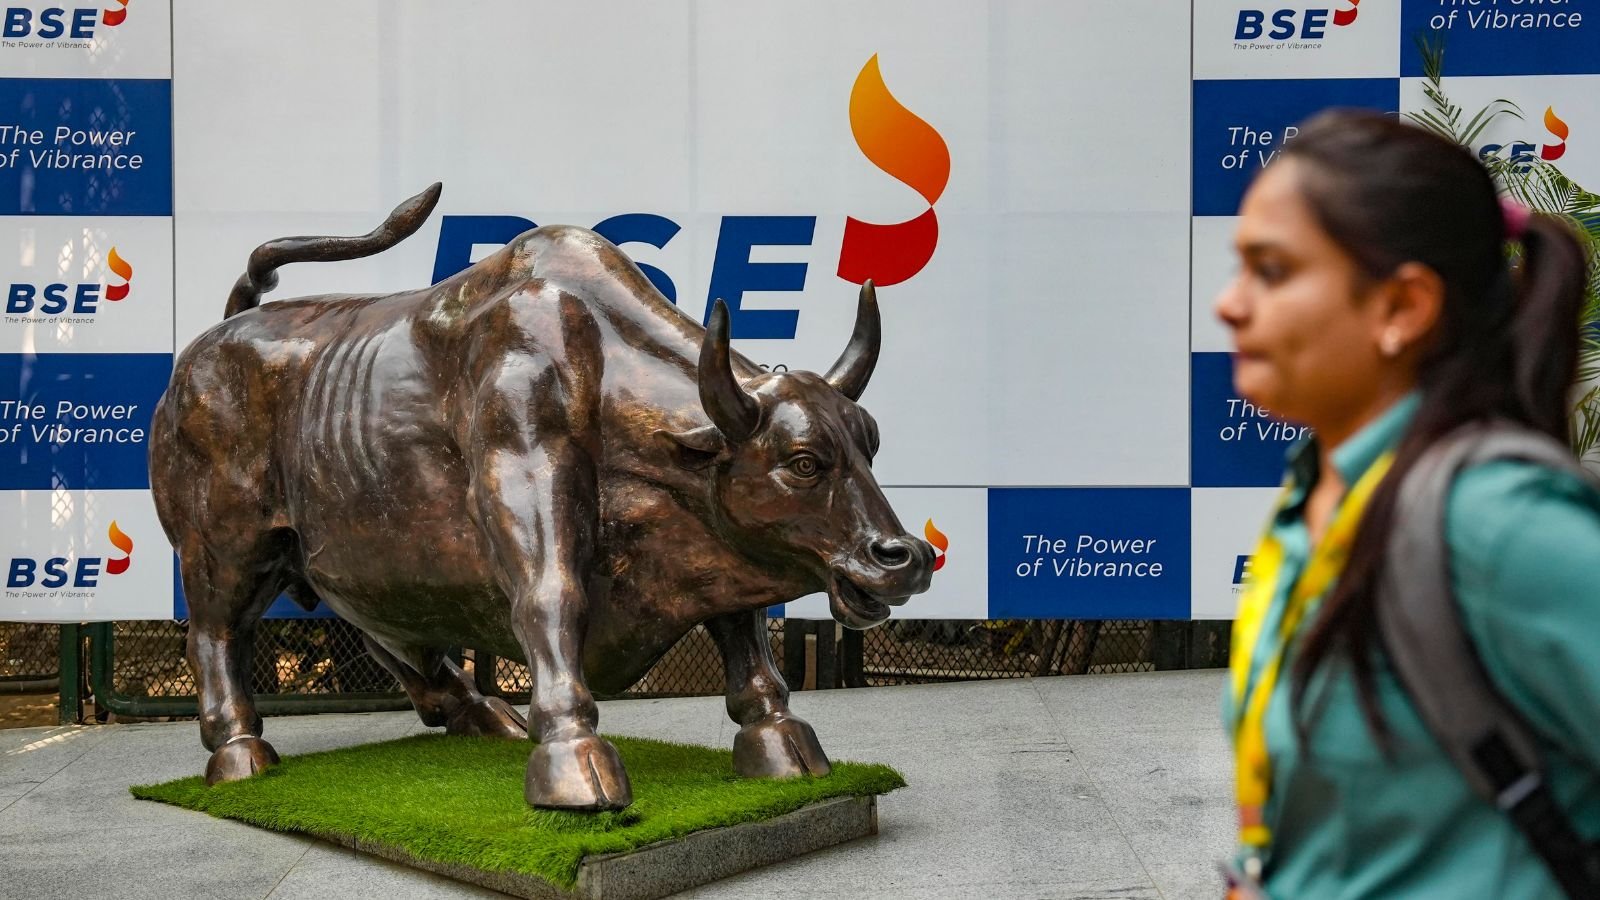 Share Market Today Live: GIFT Nifty indicates a stronger start for BSE Sensex (File Image)